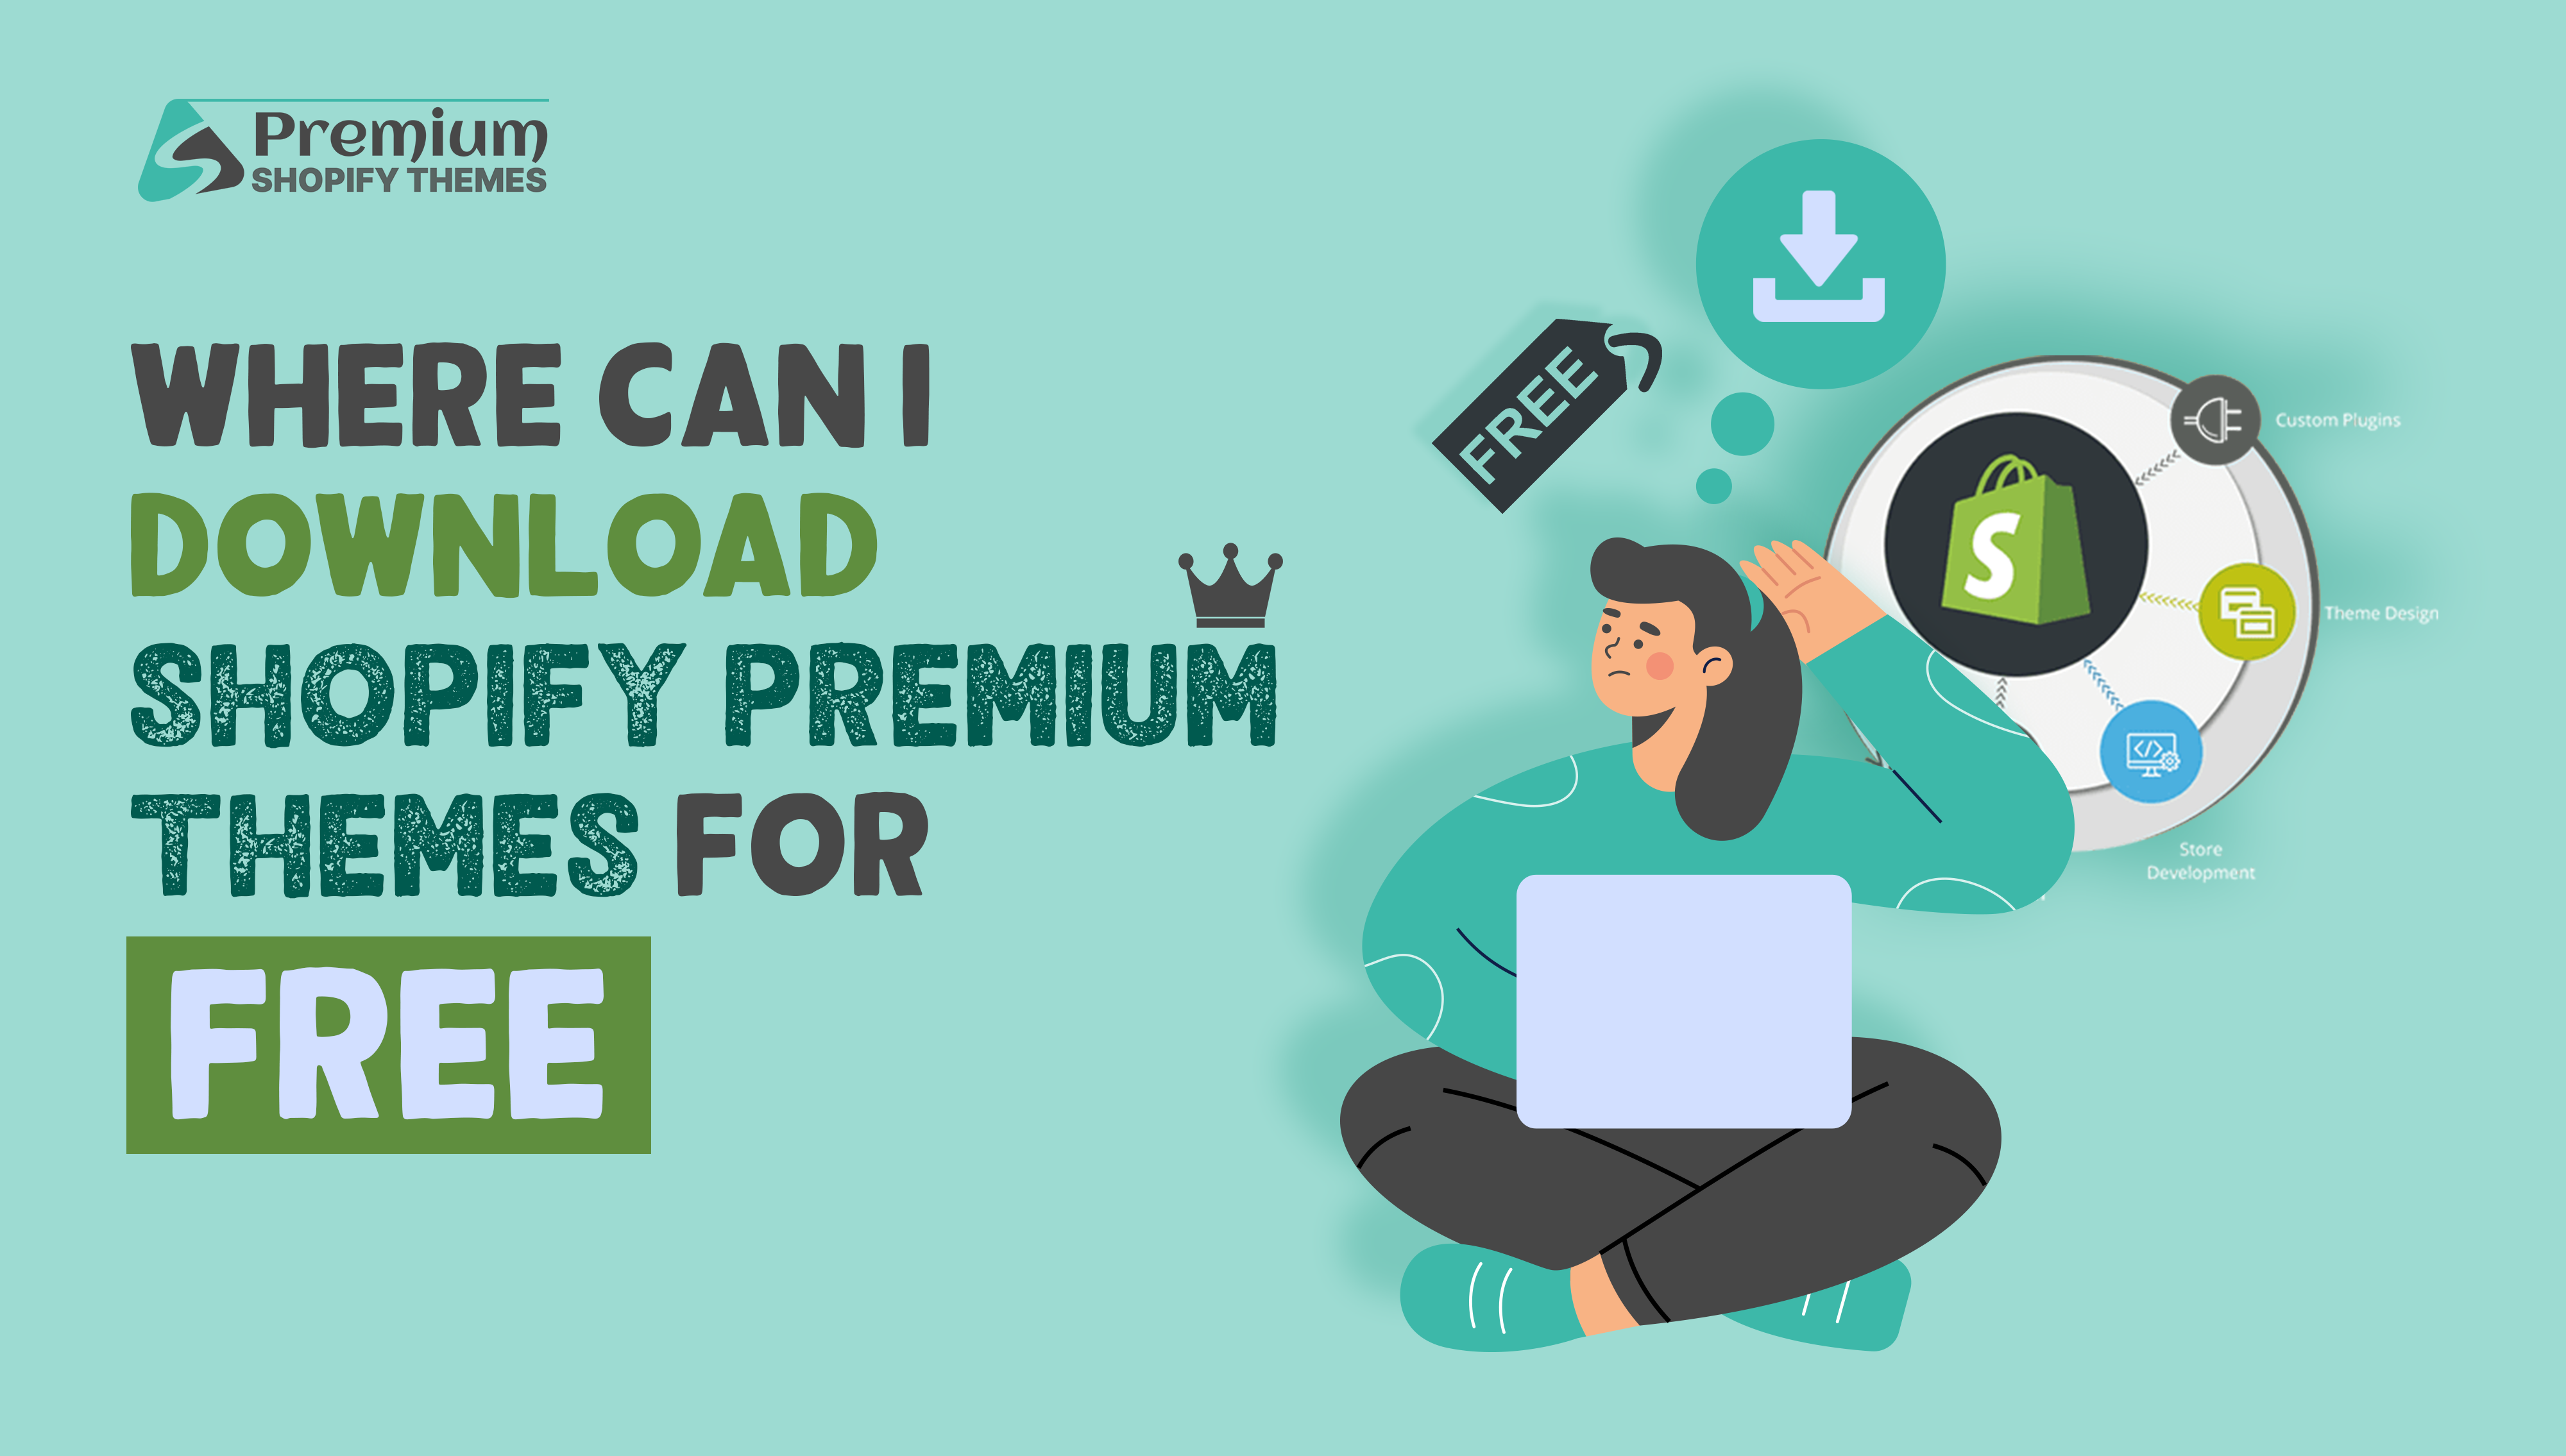 Where can I download Shopify premium themes for free?